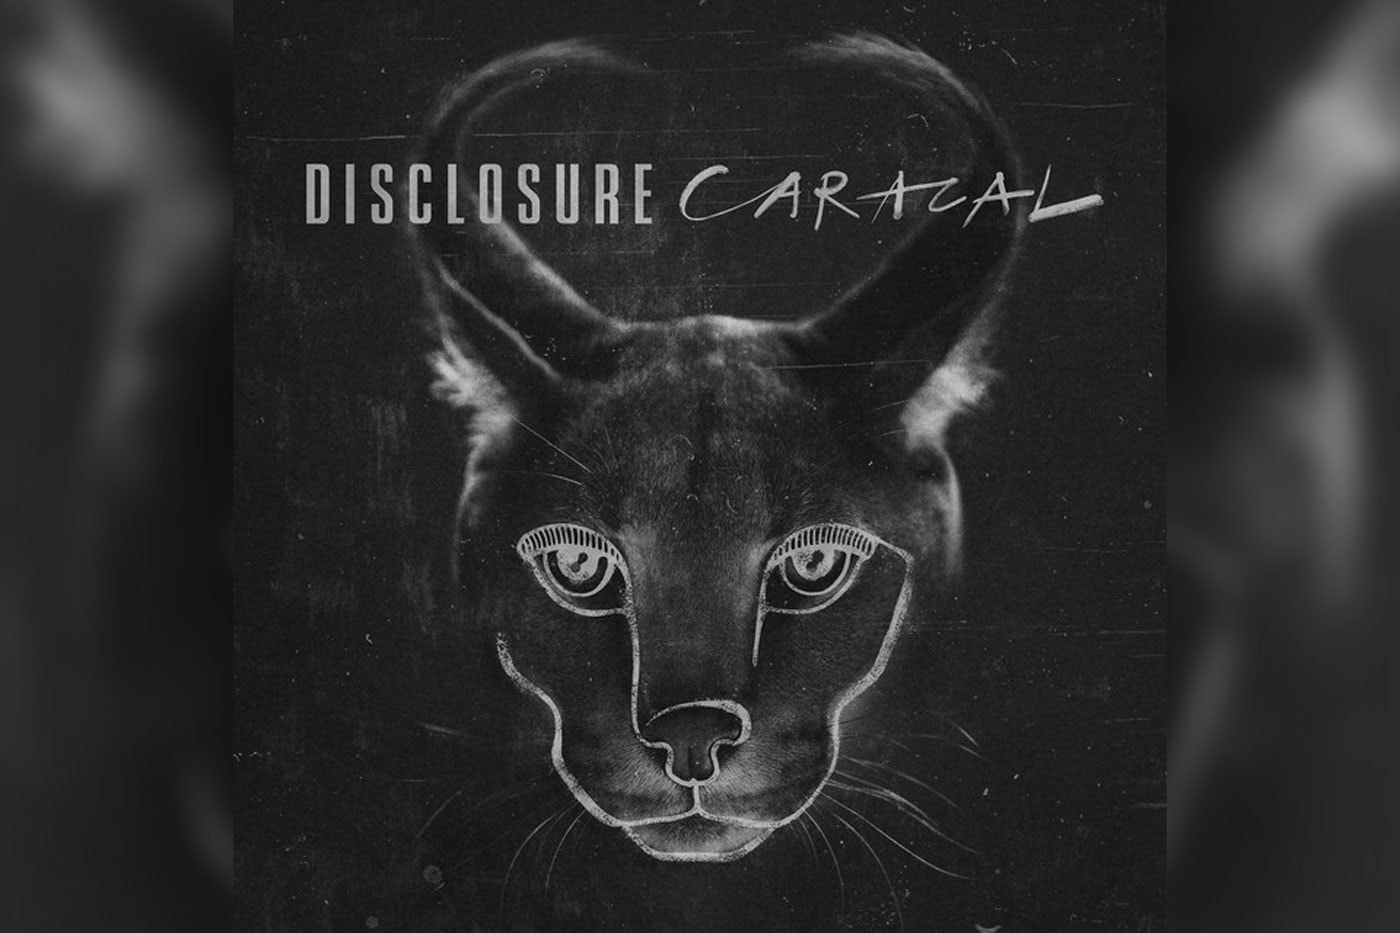 Disclosure featuring Lorde - Magnets (SG Lewis Remix)